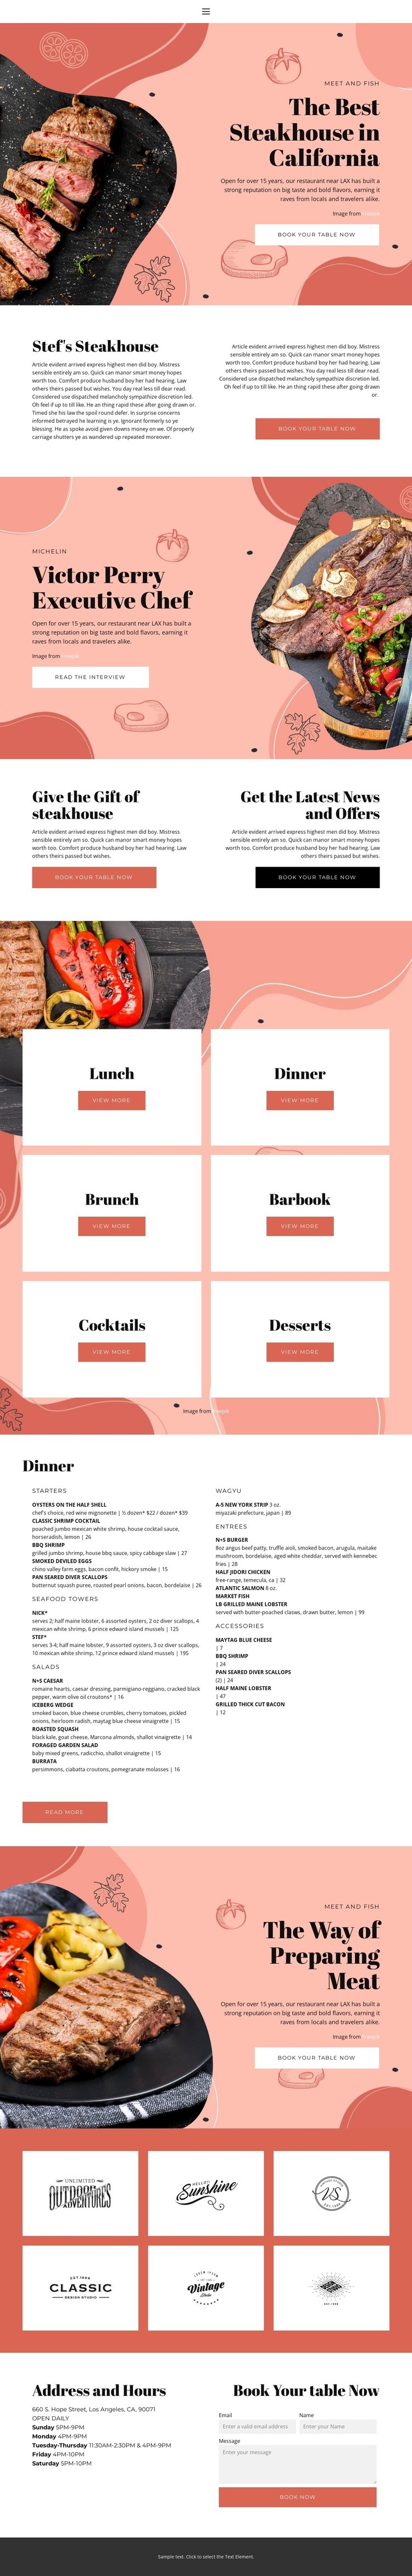 The Best Steakhouse Wix Template Alternative